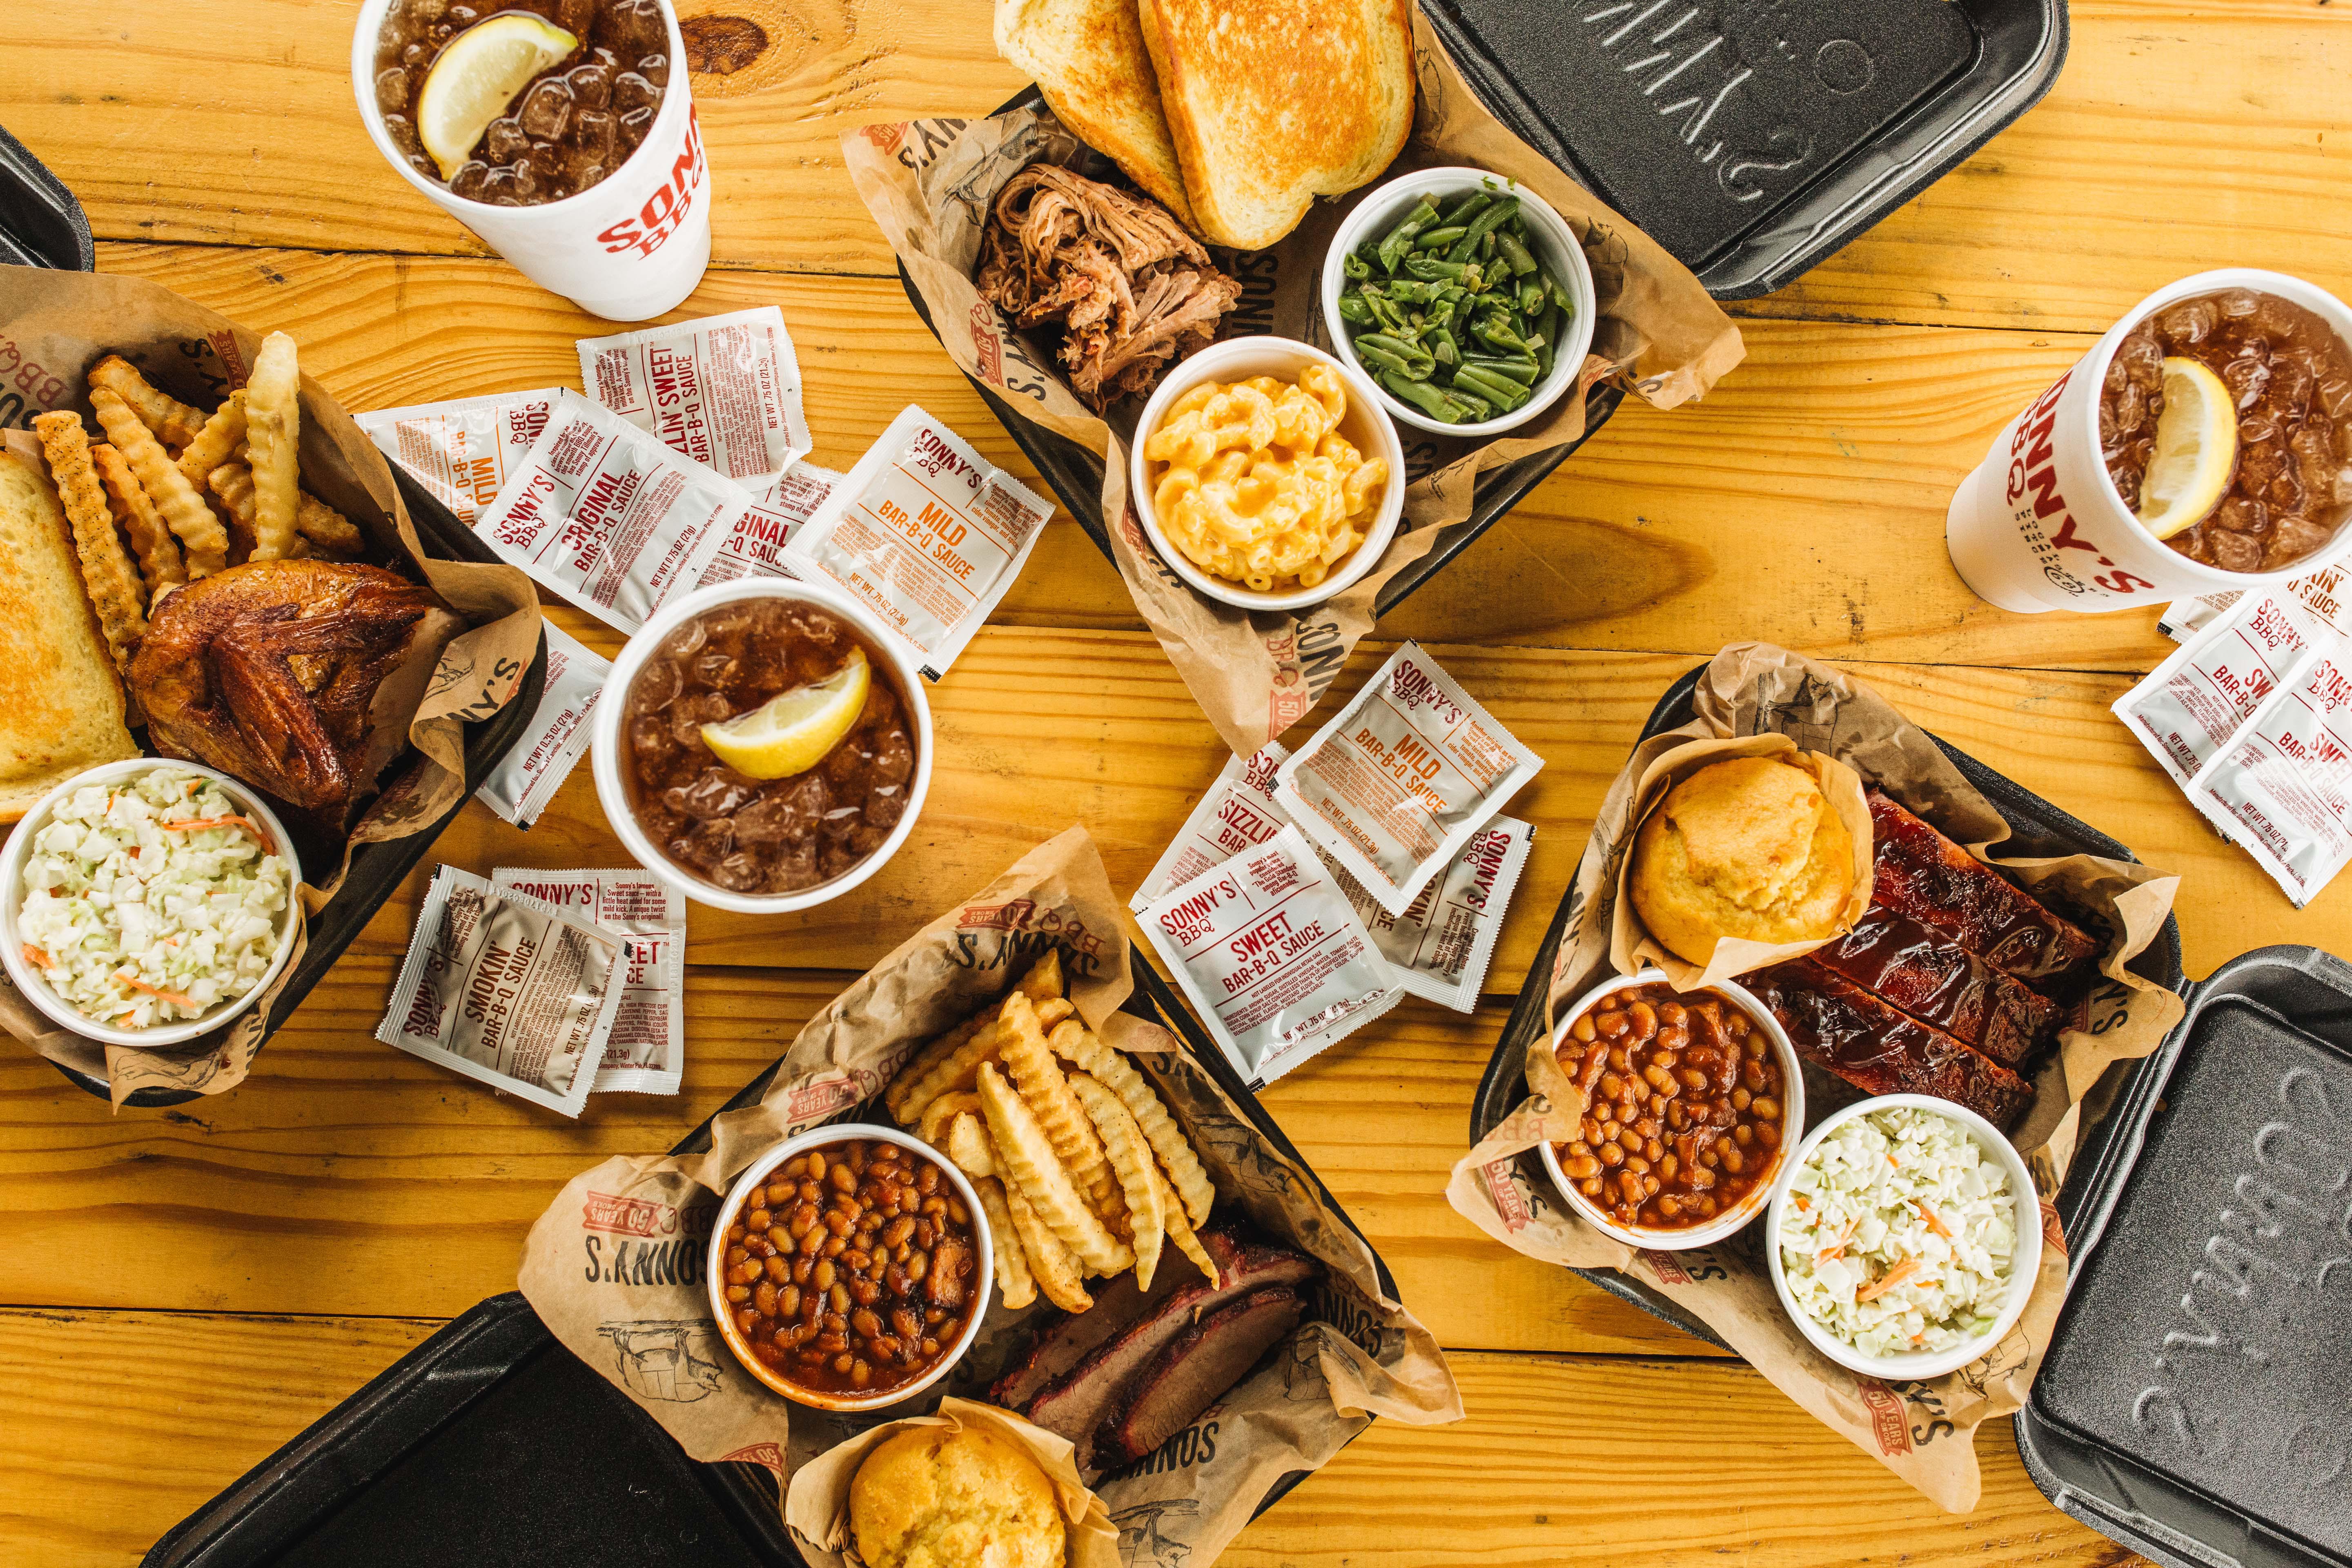 Sonny's BBQ Coupons near me in Mooresville, NC 28117 ...